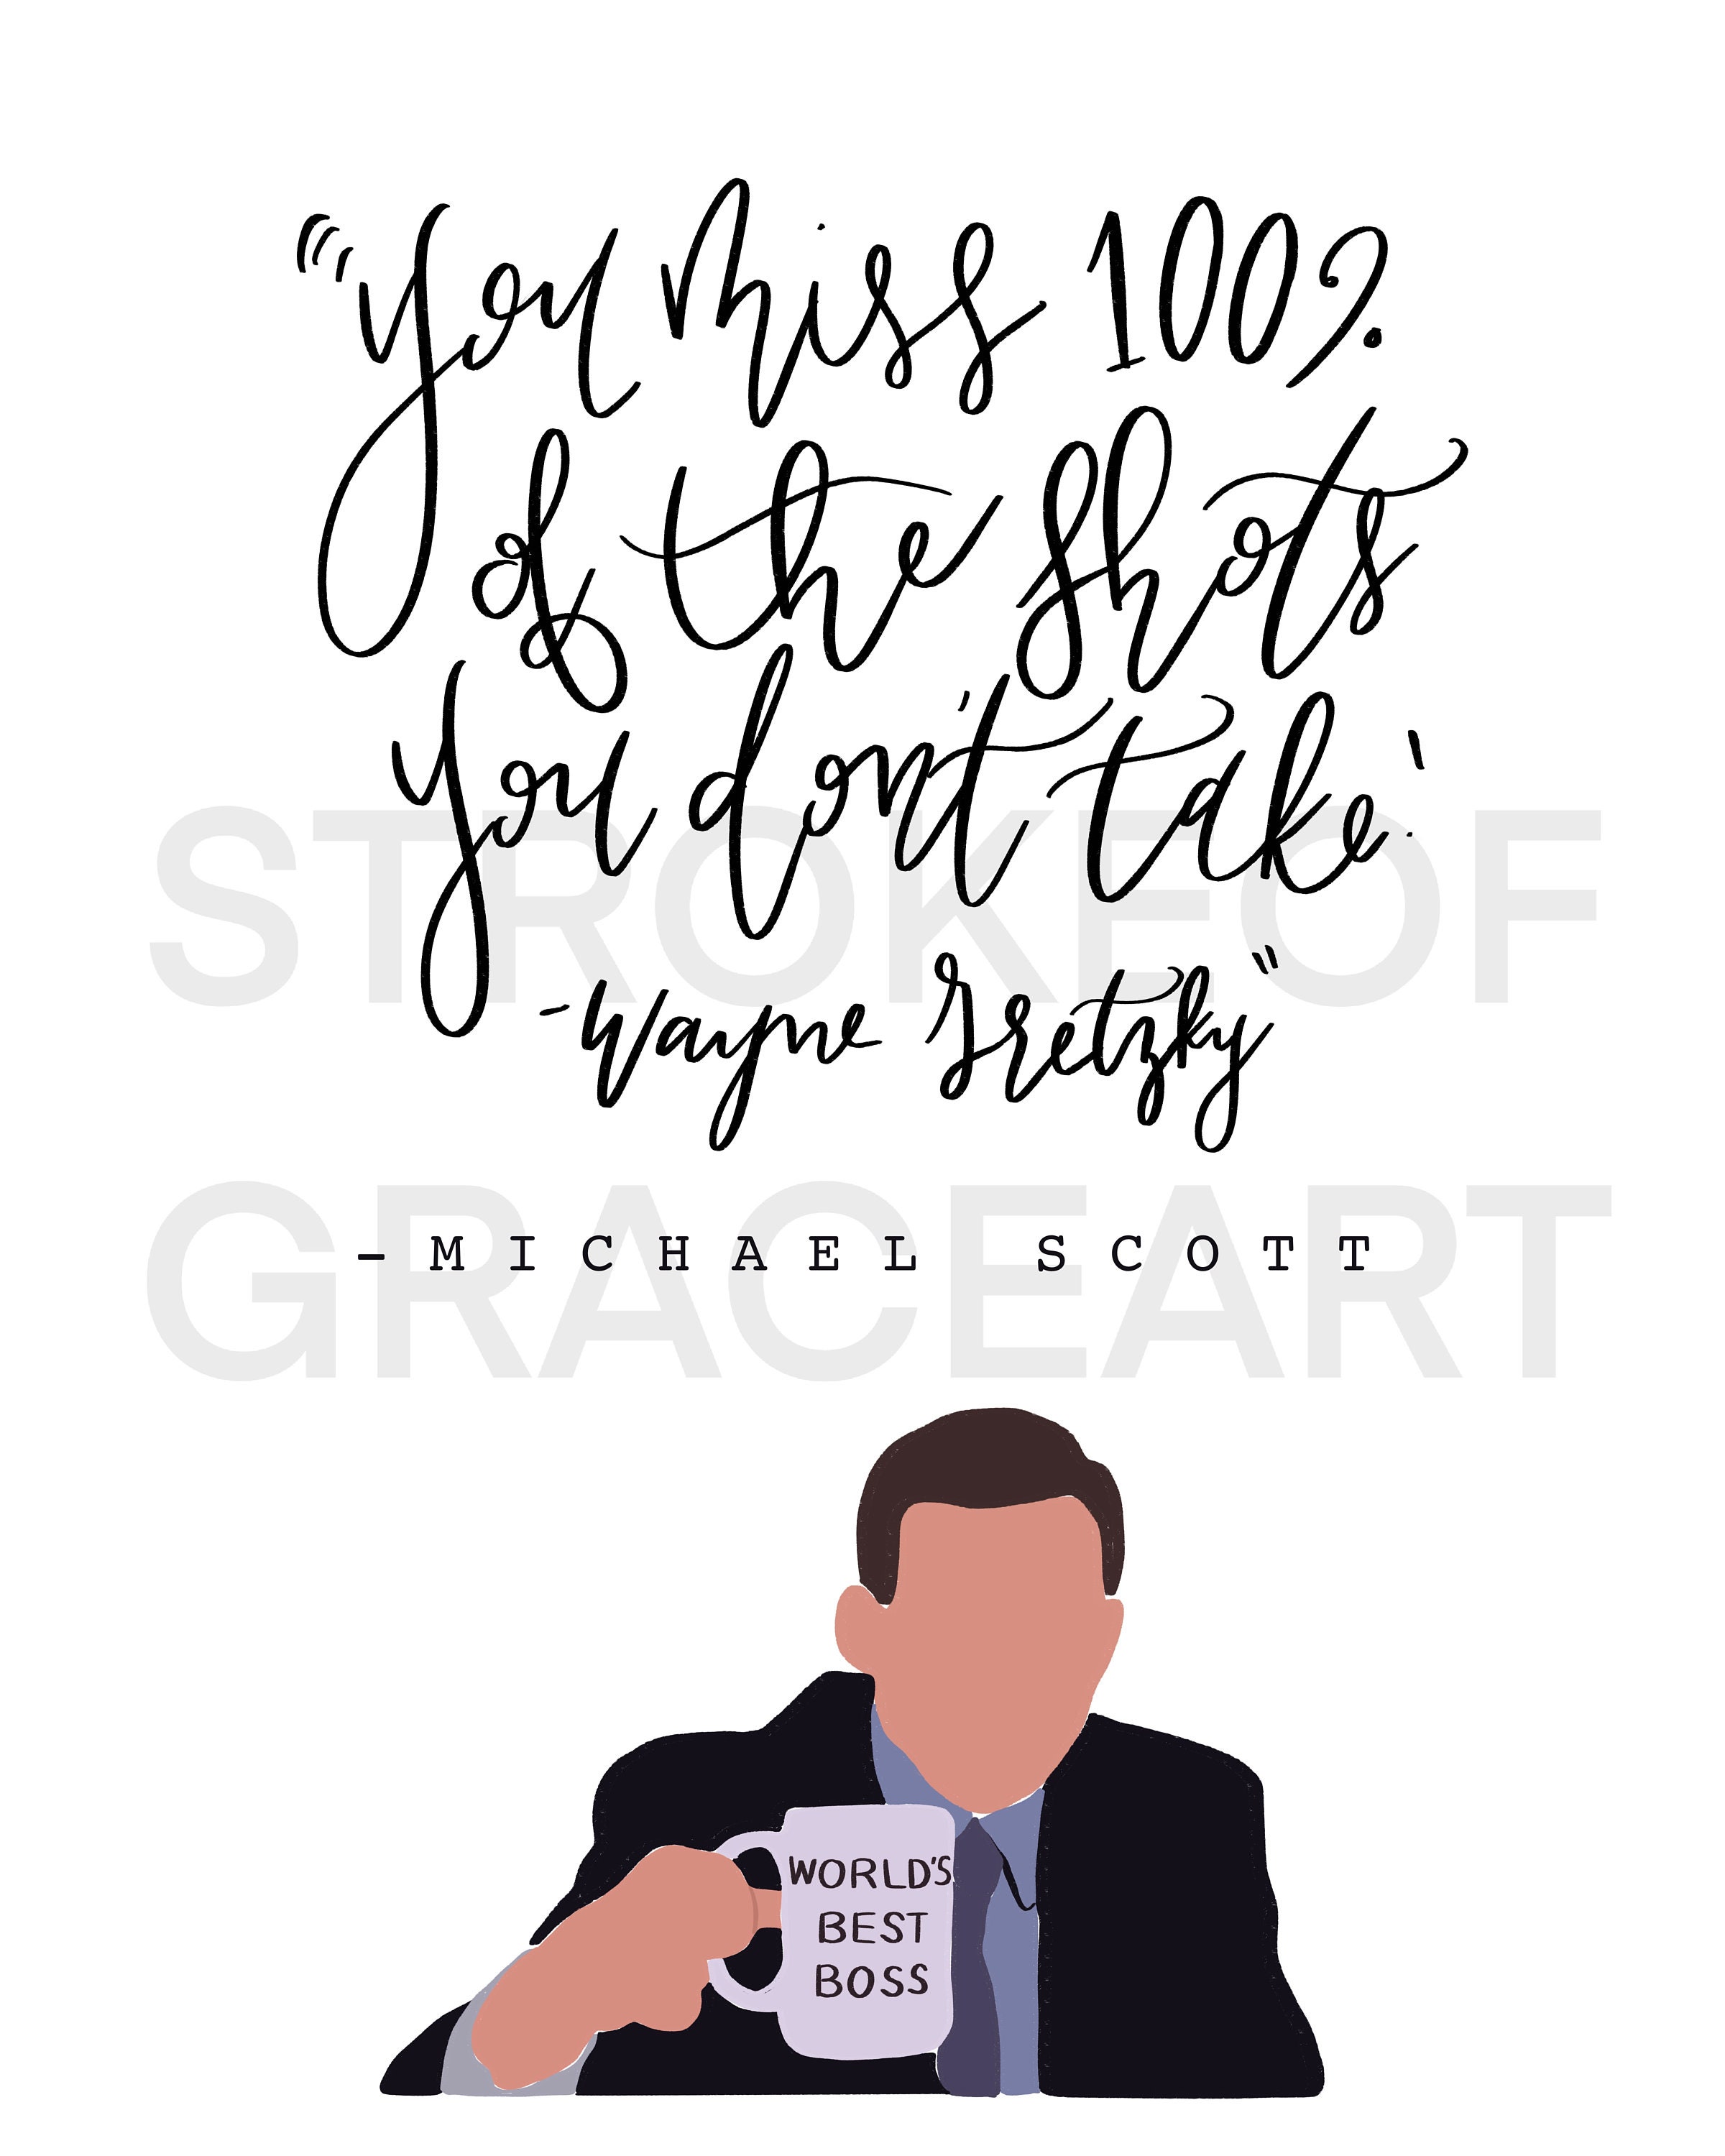  Michael Scott The Office Motivational Quote Frame Wall Art  Decor 8x10 The Office Gift - You Miss 100% Of The Shots You Dont Take - The  Office Merchandise - The office